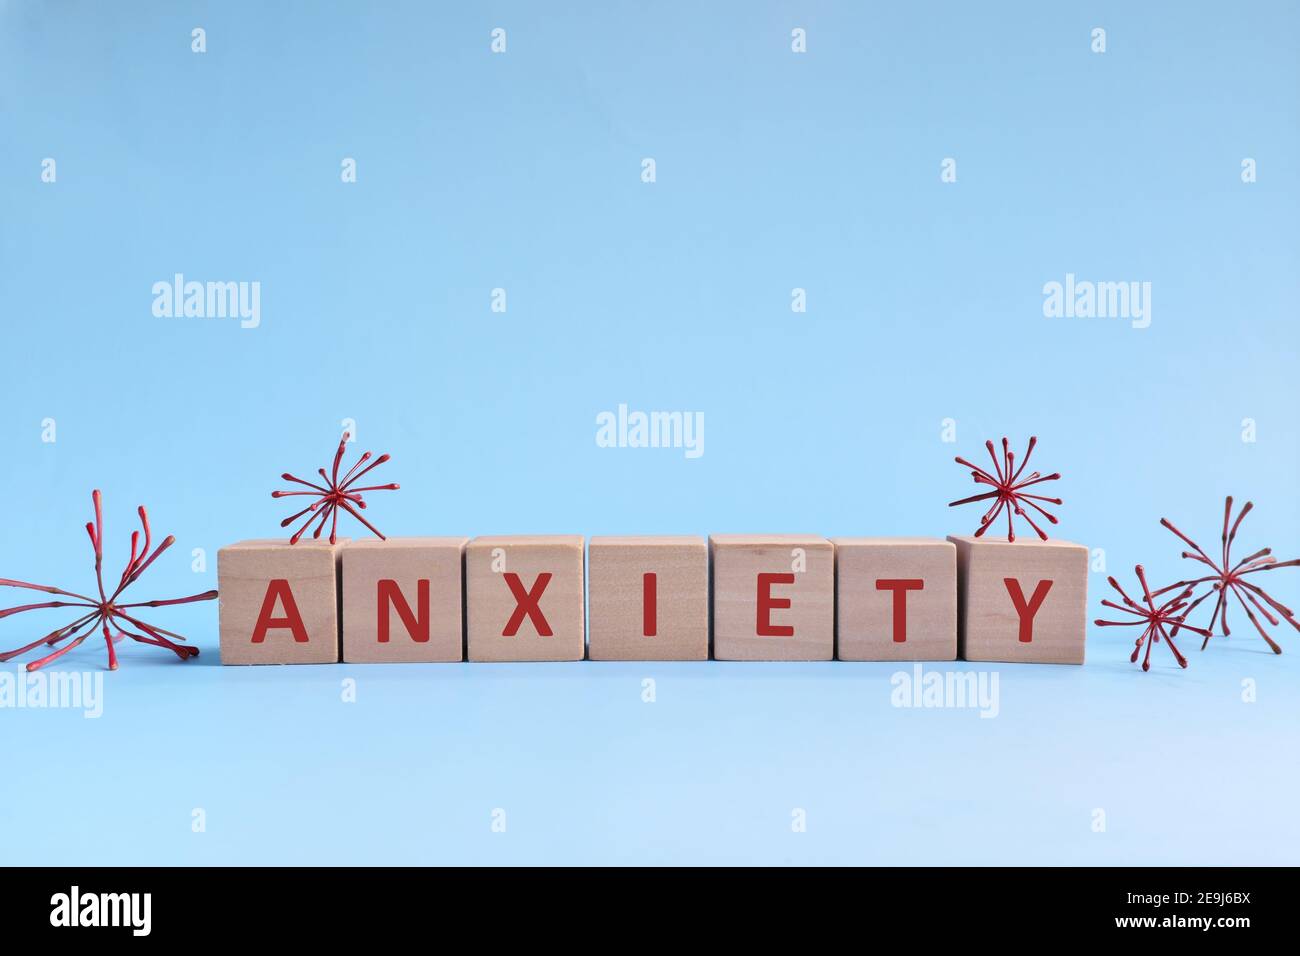 Anxiety word in wooden blocks on blue background. Coping with anxiety, stress, ptsd and depression during covid-19 pandemic concept. Stock Photo